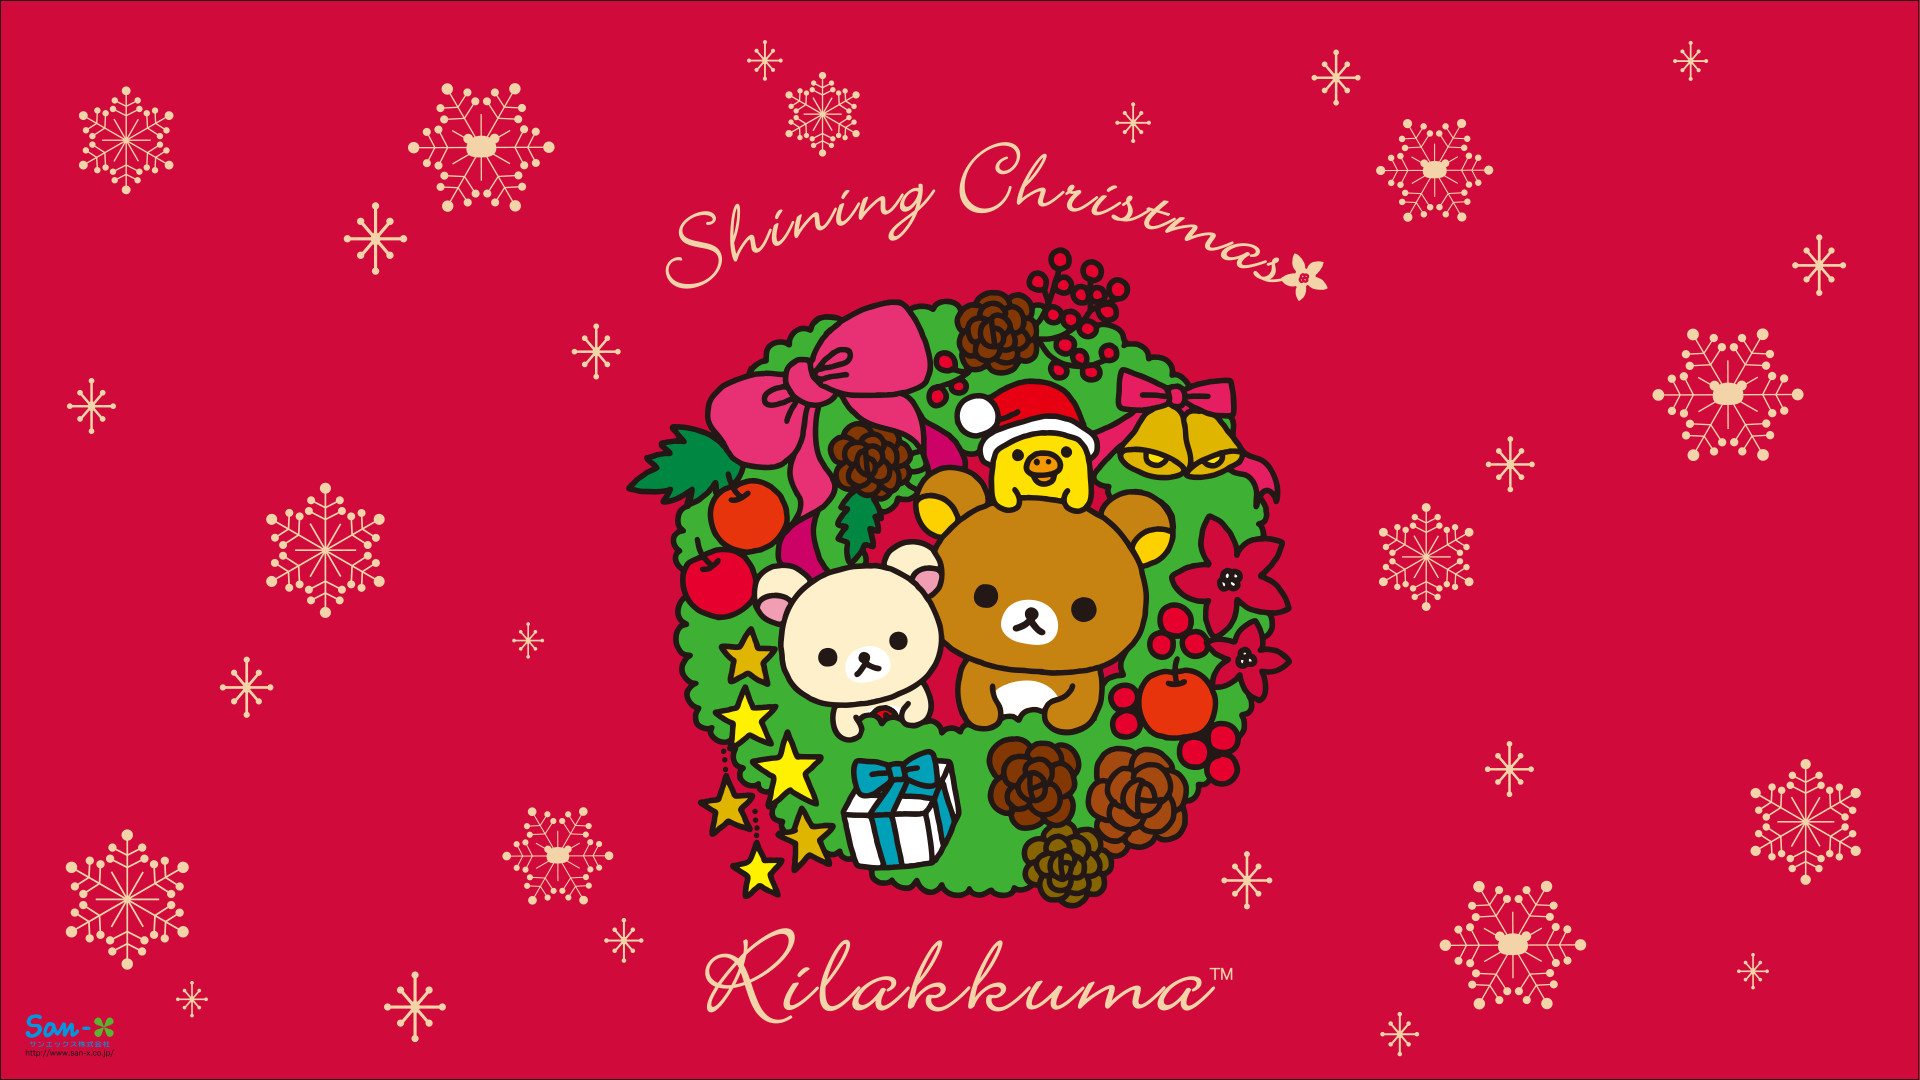 1920x1080 ... San-X's most recent Rilakkuma Christmas wallpaper is a crimson red with  snowflakes and a Christmas wreath with Rilakkuma, Korilakkuma and Kiiroit.